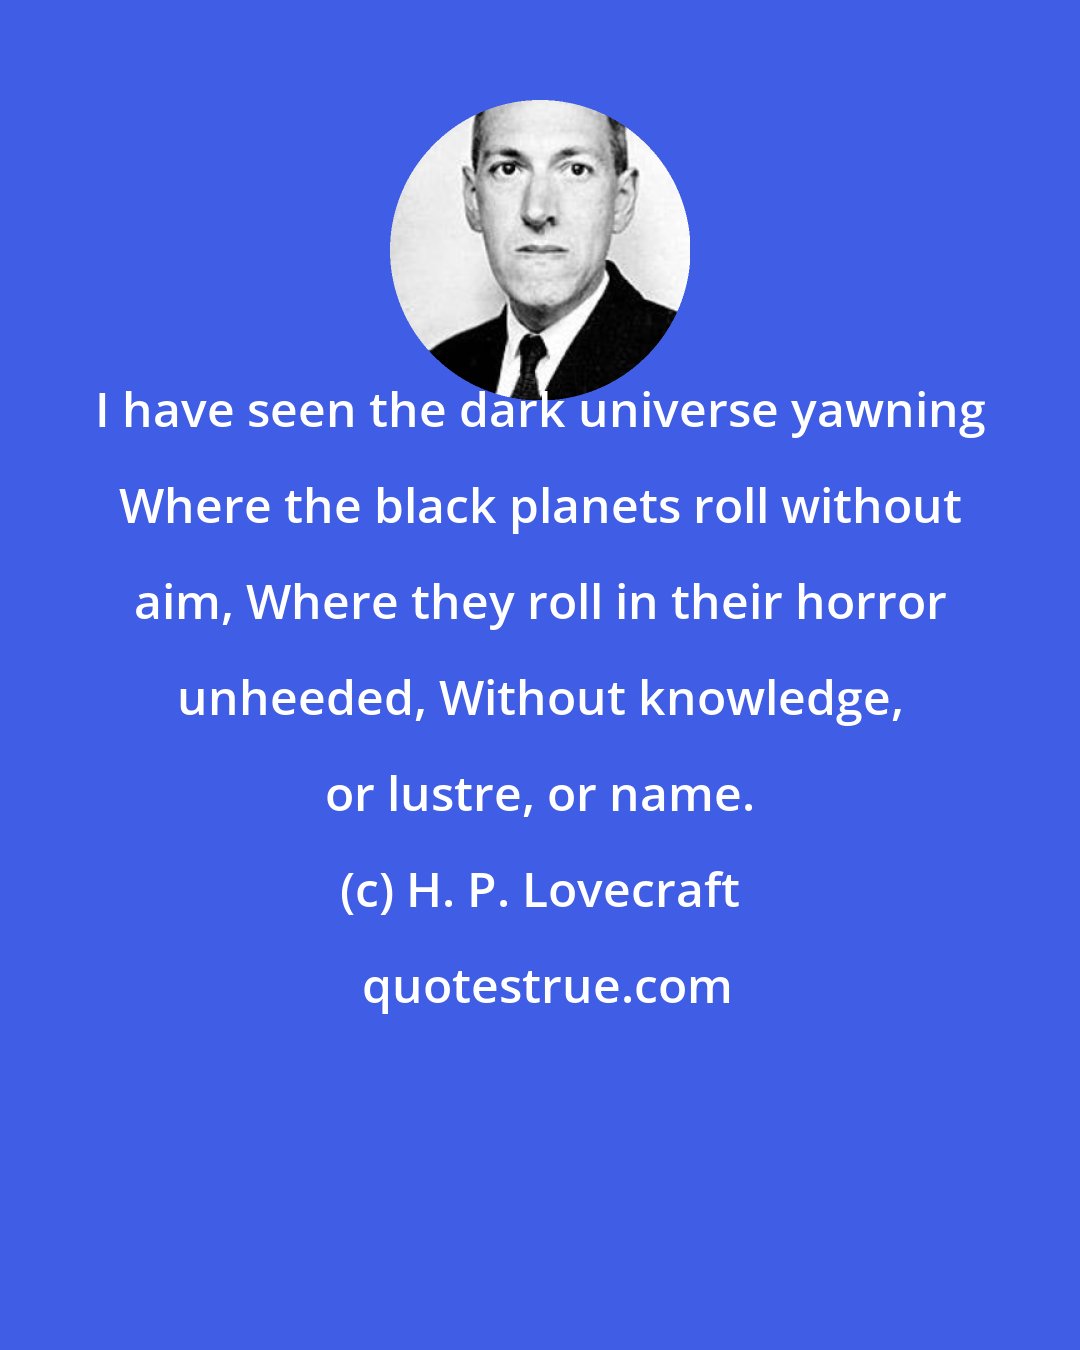 H. P. Lovecraft: I have seen the dark universe yawning Where the black planets roll without aim, Where they roll in their horror unheeded, Without knowledge, or lustre, or name.